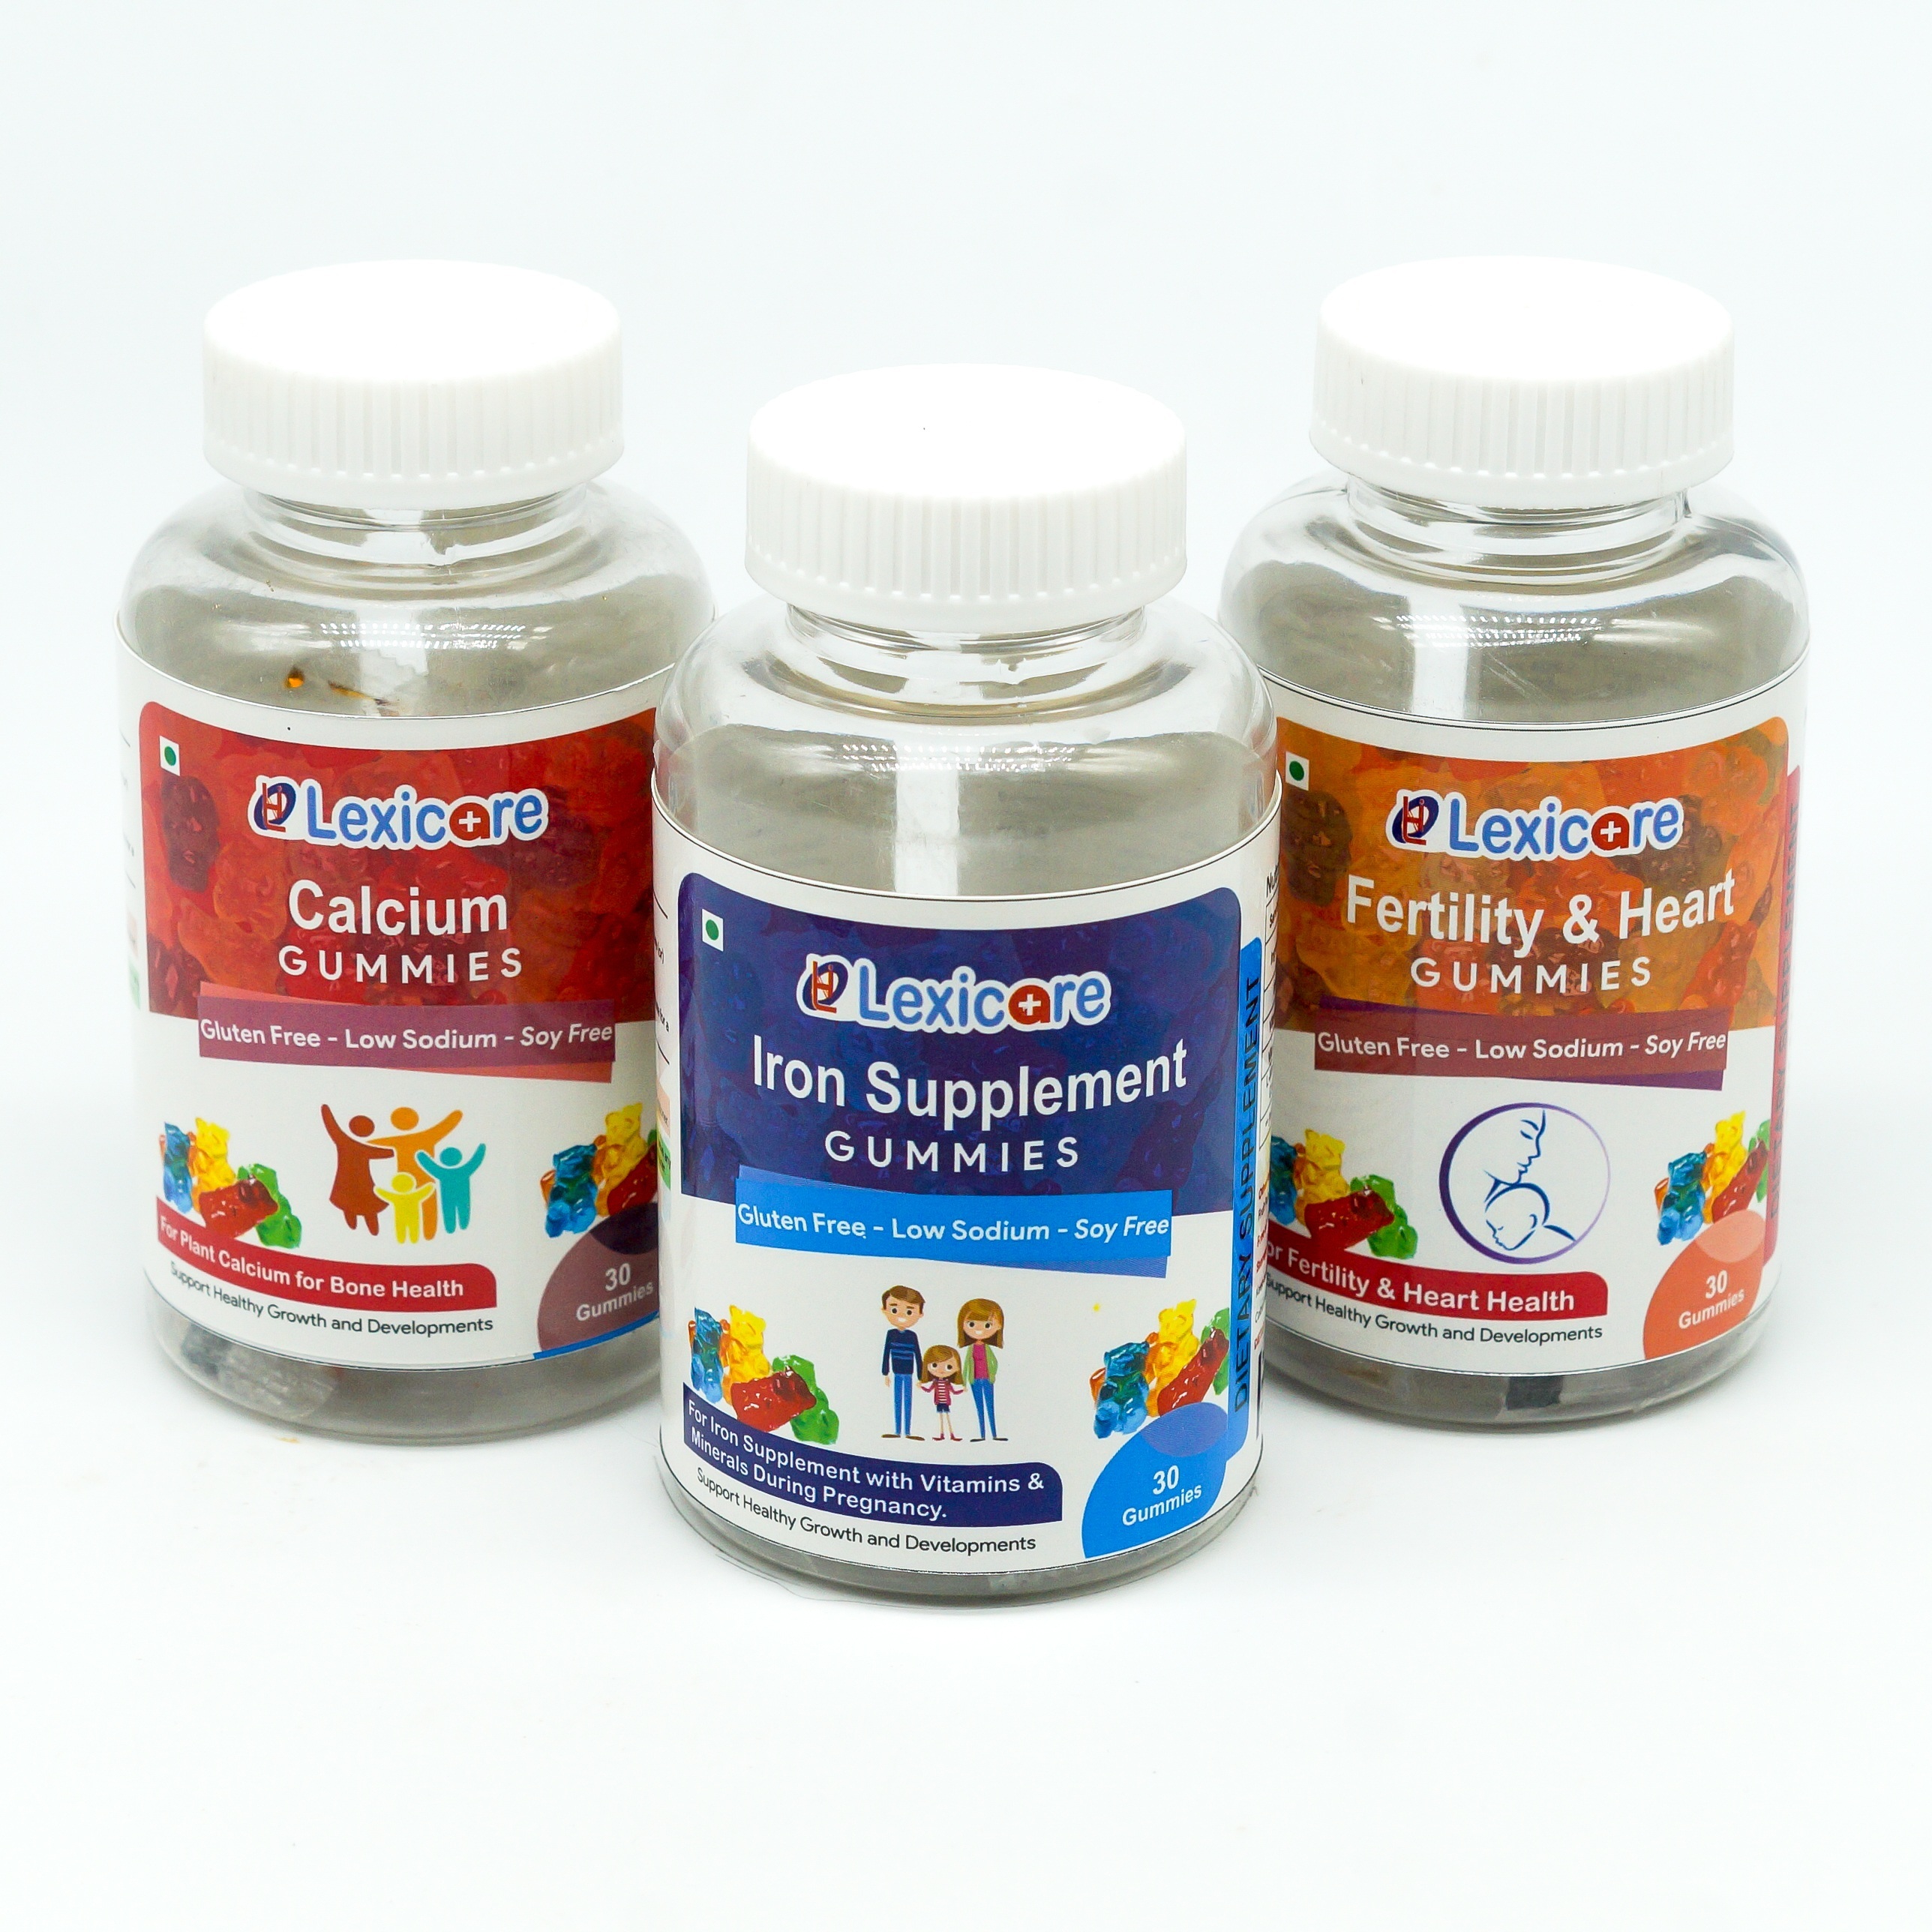 Iron Supplements with Vitamin B6 and B12 and L Methyl folate Gummies